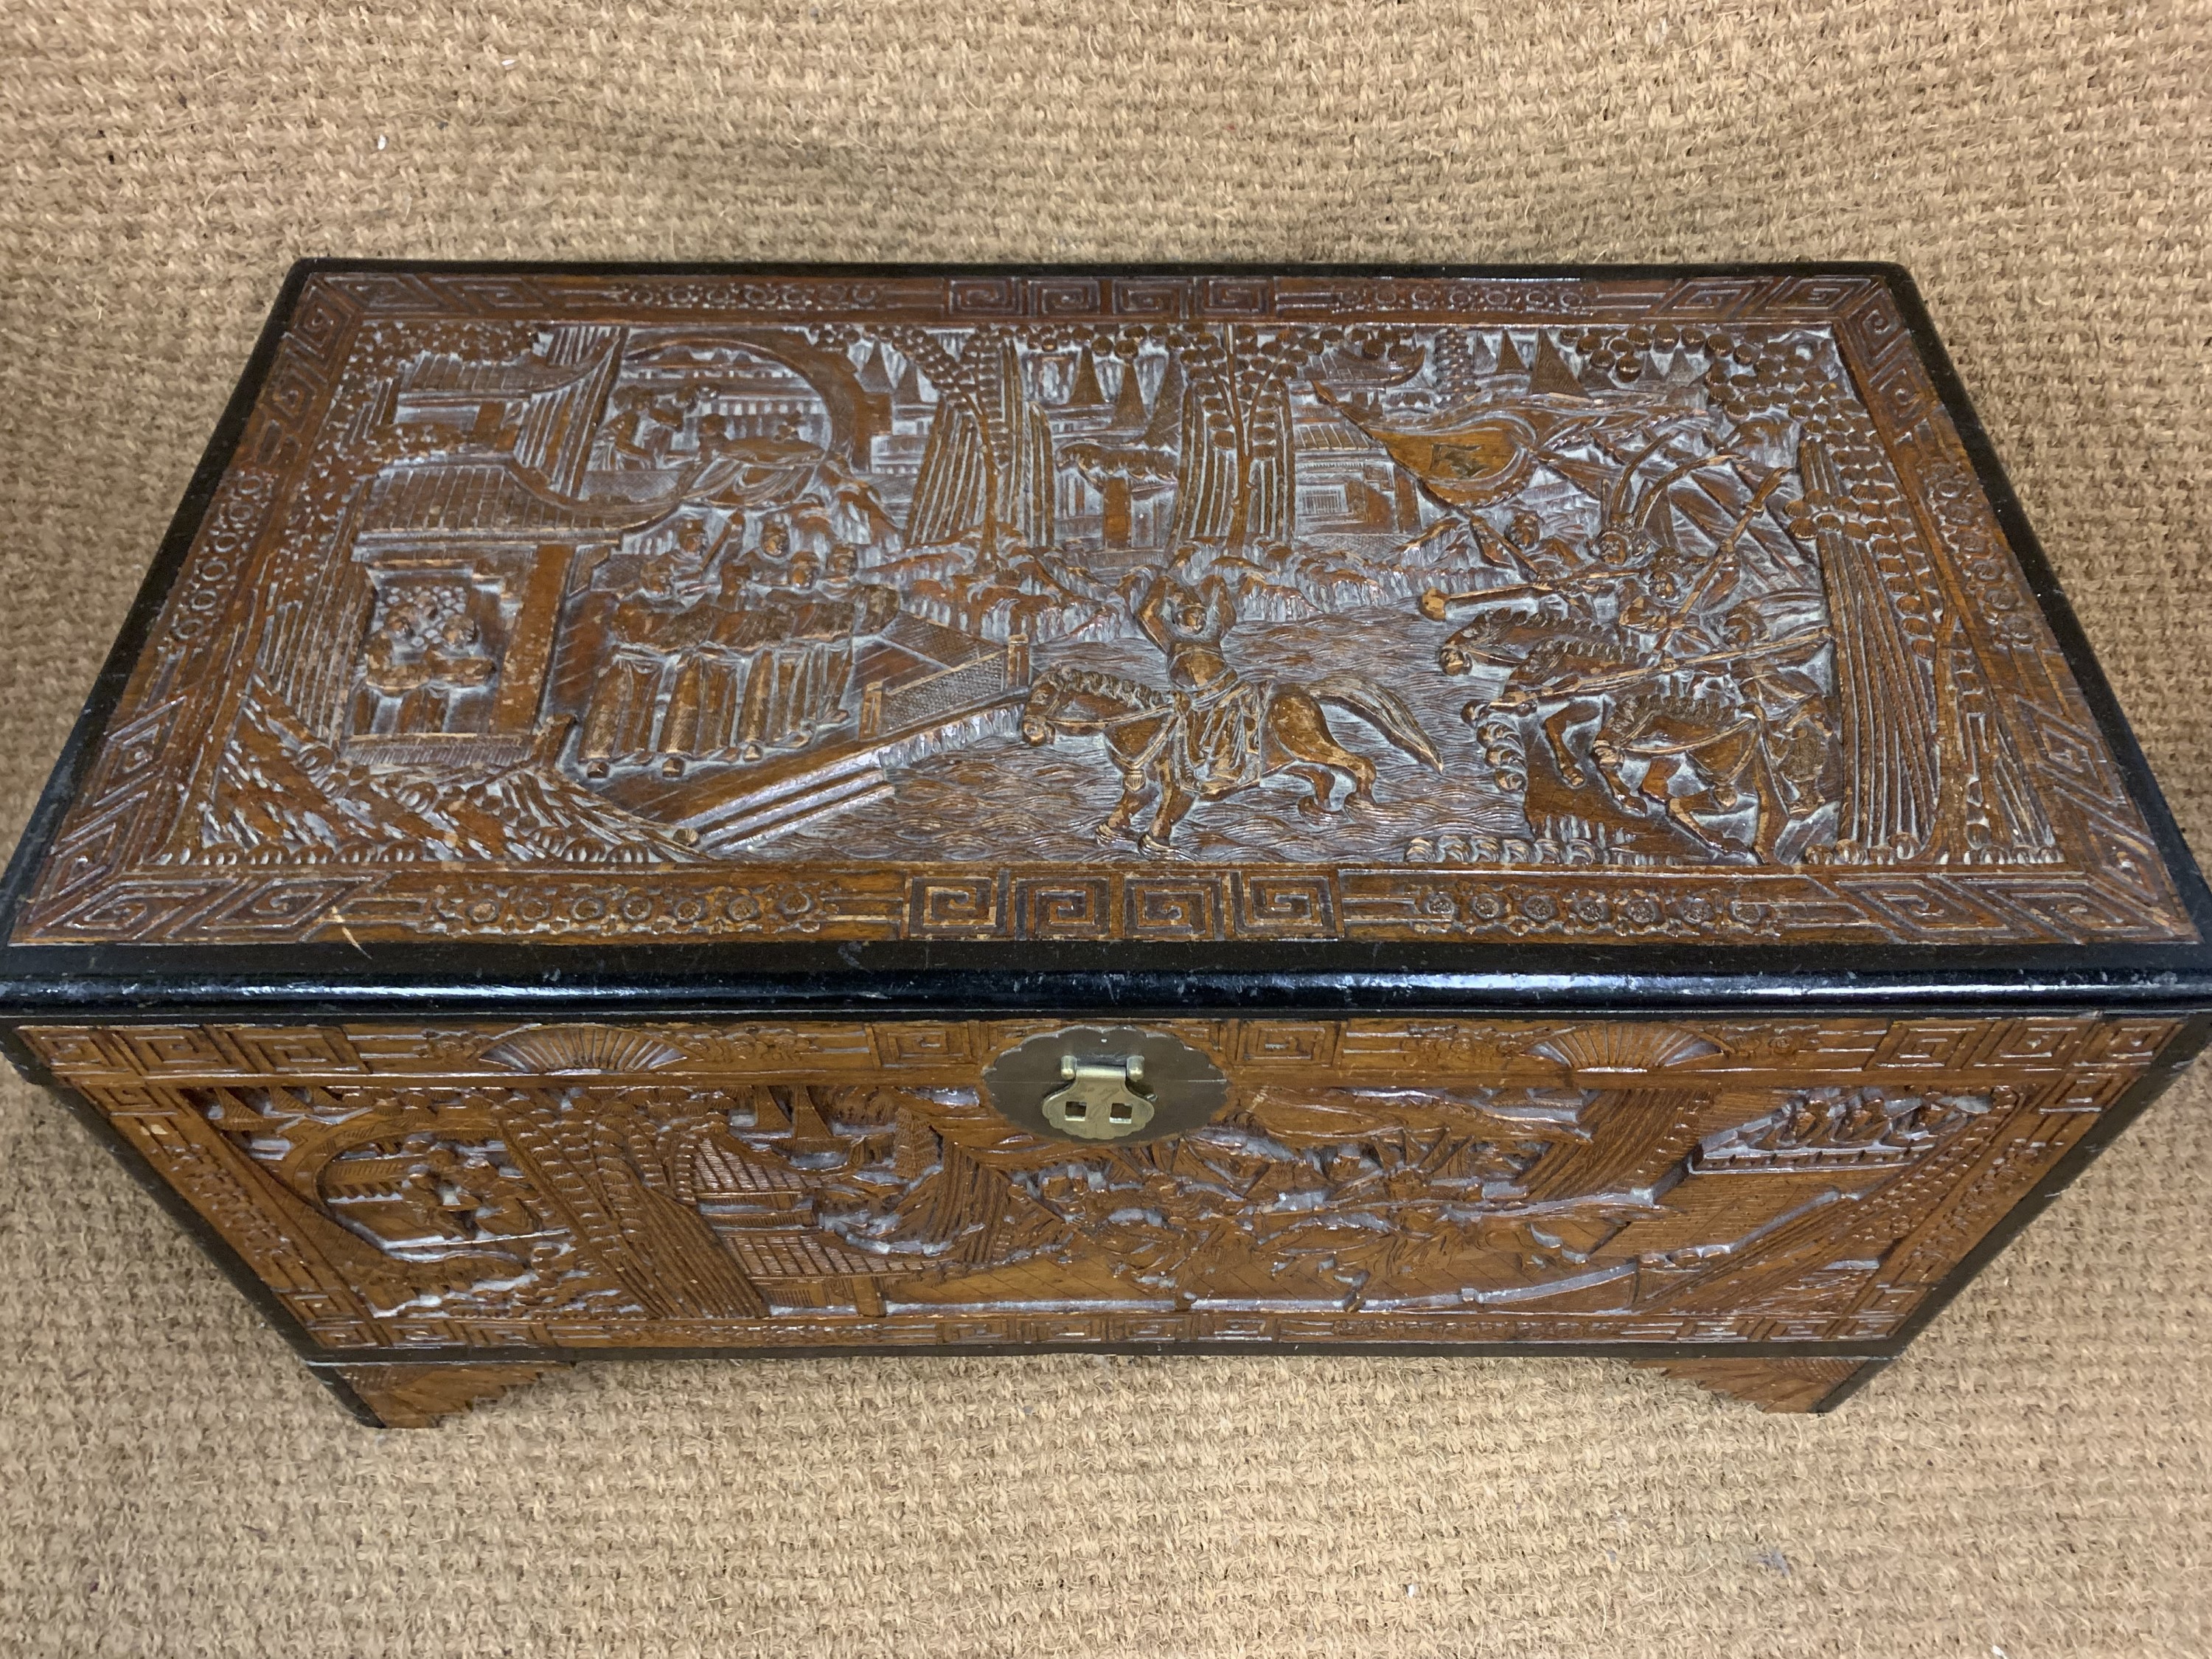 A 20th Century Chinese carved camphor wood chest, 100 cm x 54 cm x 53 cm - Image 2 of 5